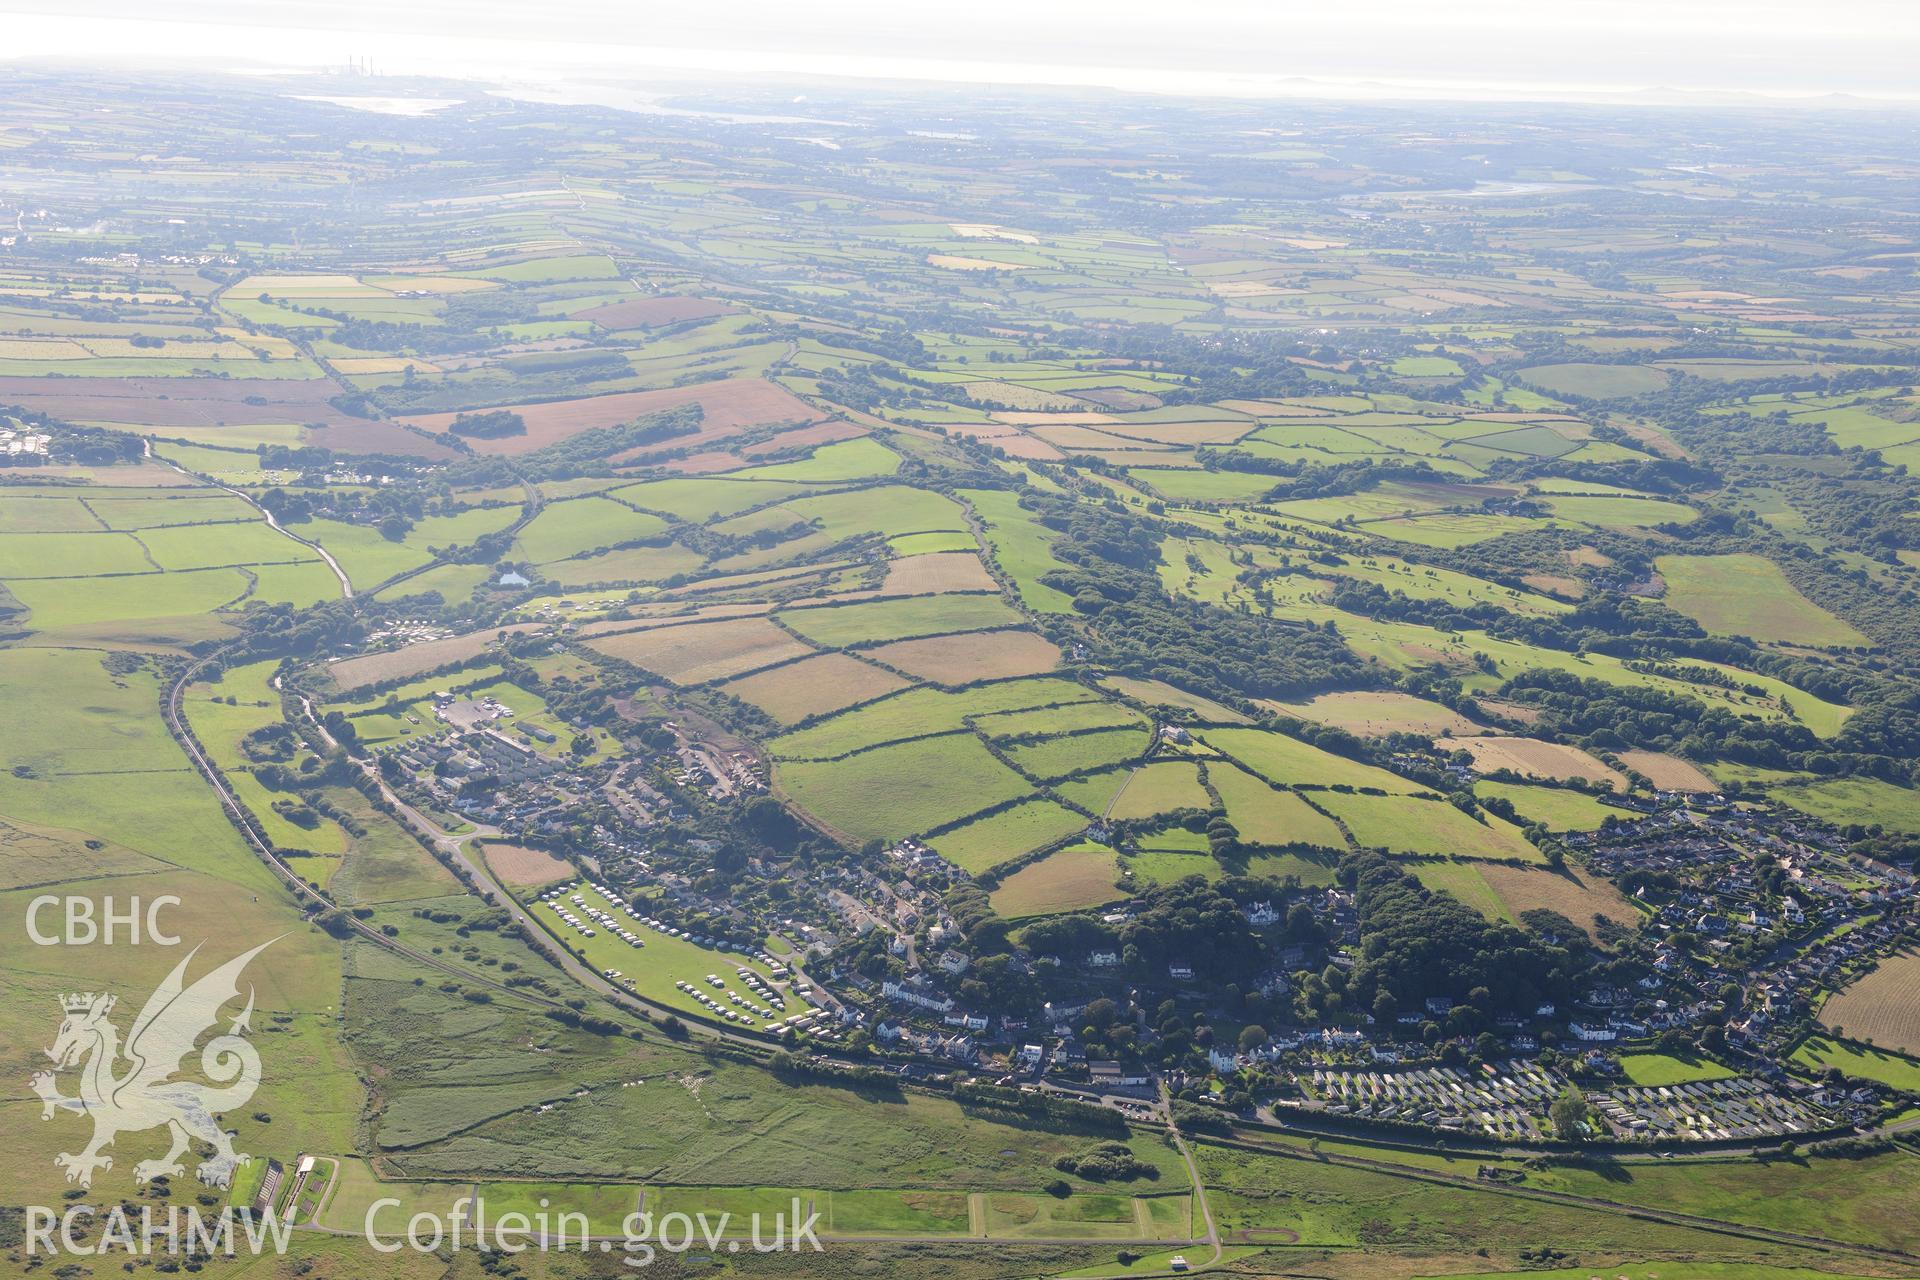 RCAHMW colour oblique photograph of Penally village, landscape from the east. Taken by Toby Driver on 24/07/2012.